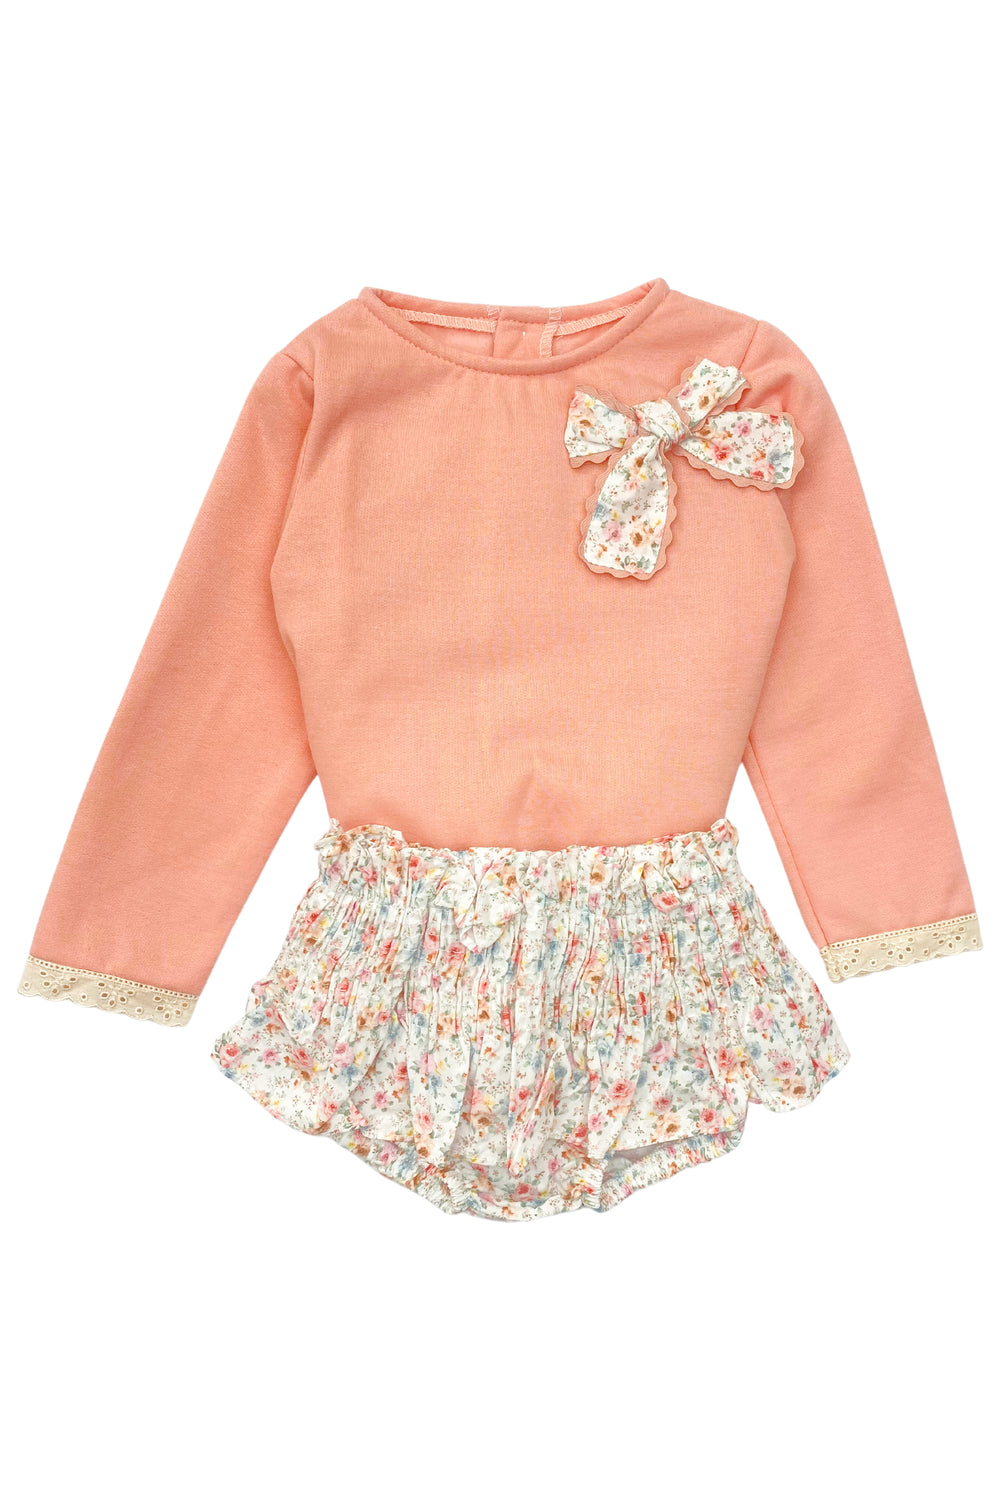 Valentina Bebes "Slyvie" Dusky Pink Top & Floral Skirt | iphoneandroidapplications